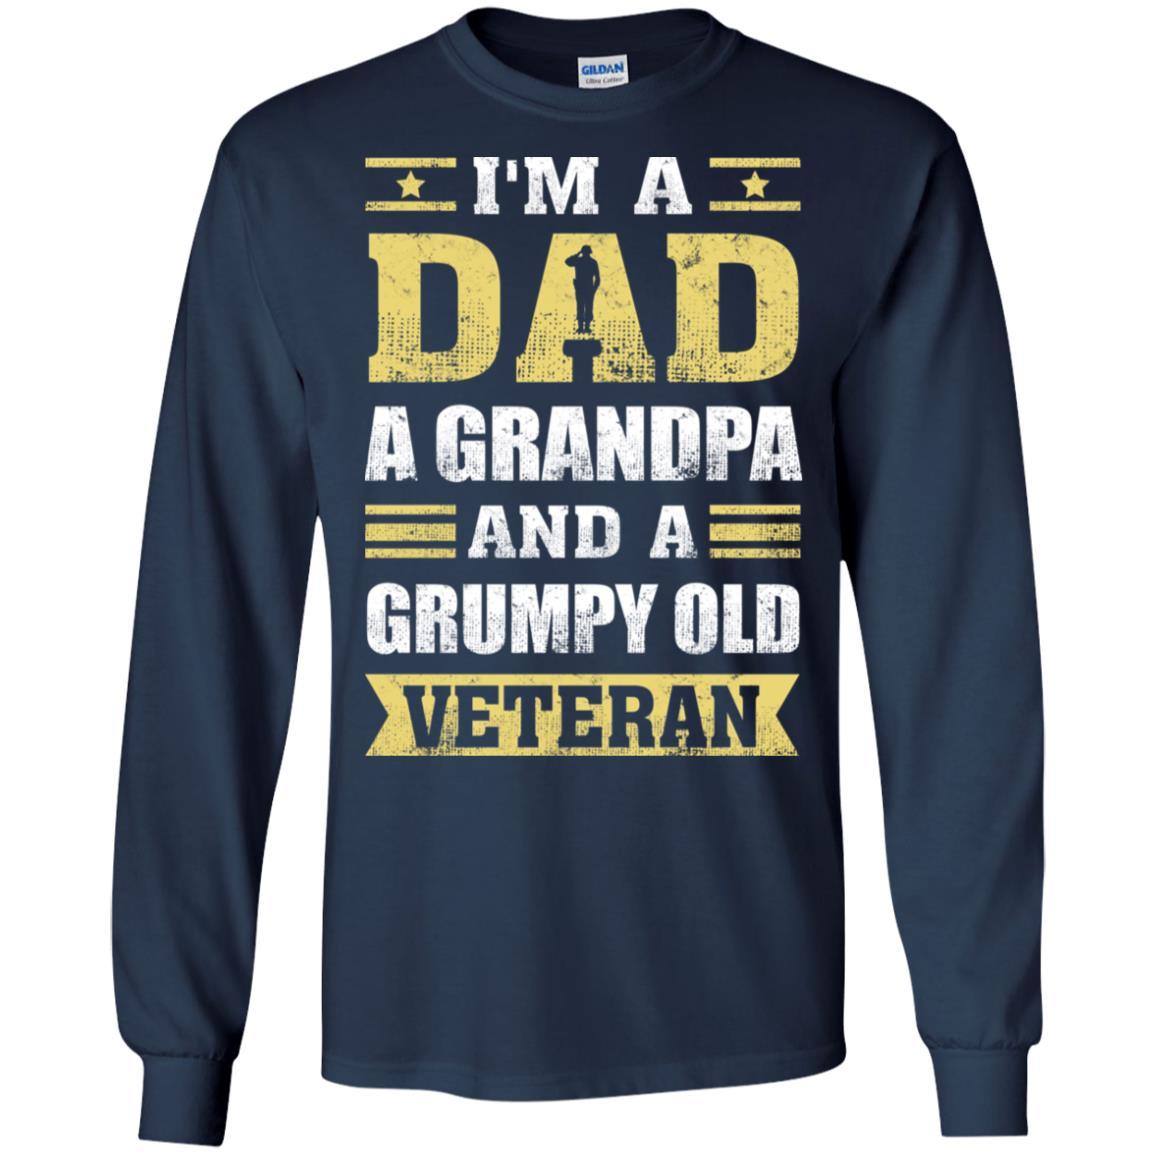 Military T-Shirt "I'm A Dad, A Grandpa And A Grumpy Old Veteran On" Front-TShirt-General-Veterans Nation